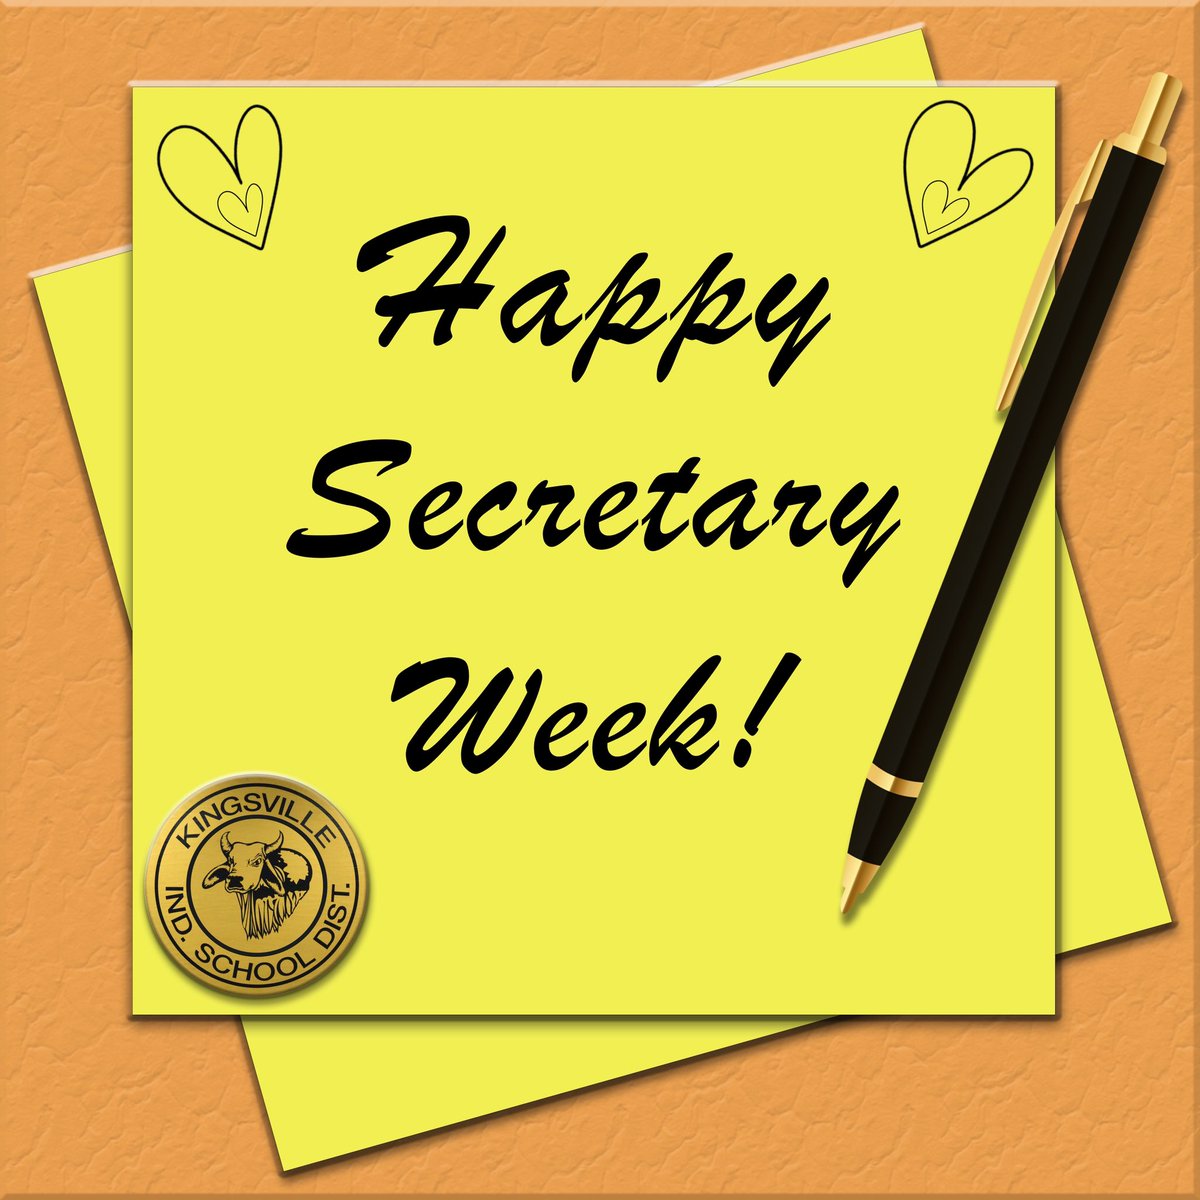 🤩 Happy Secretary Week! Thank you to all our secretaries here in KISD for everything you do for all our students and staff!! 💛🥰🖤 #KISDUnited #BrahmaPride #secretaryweek #secretaryday